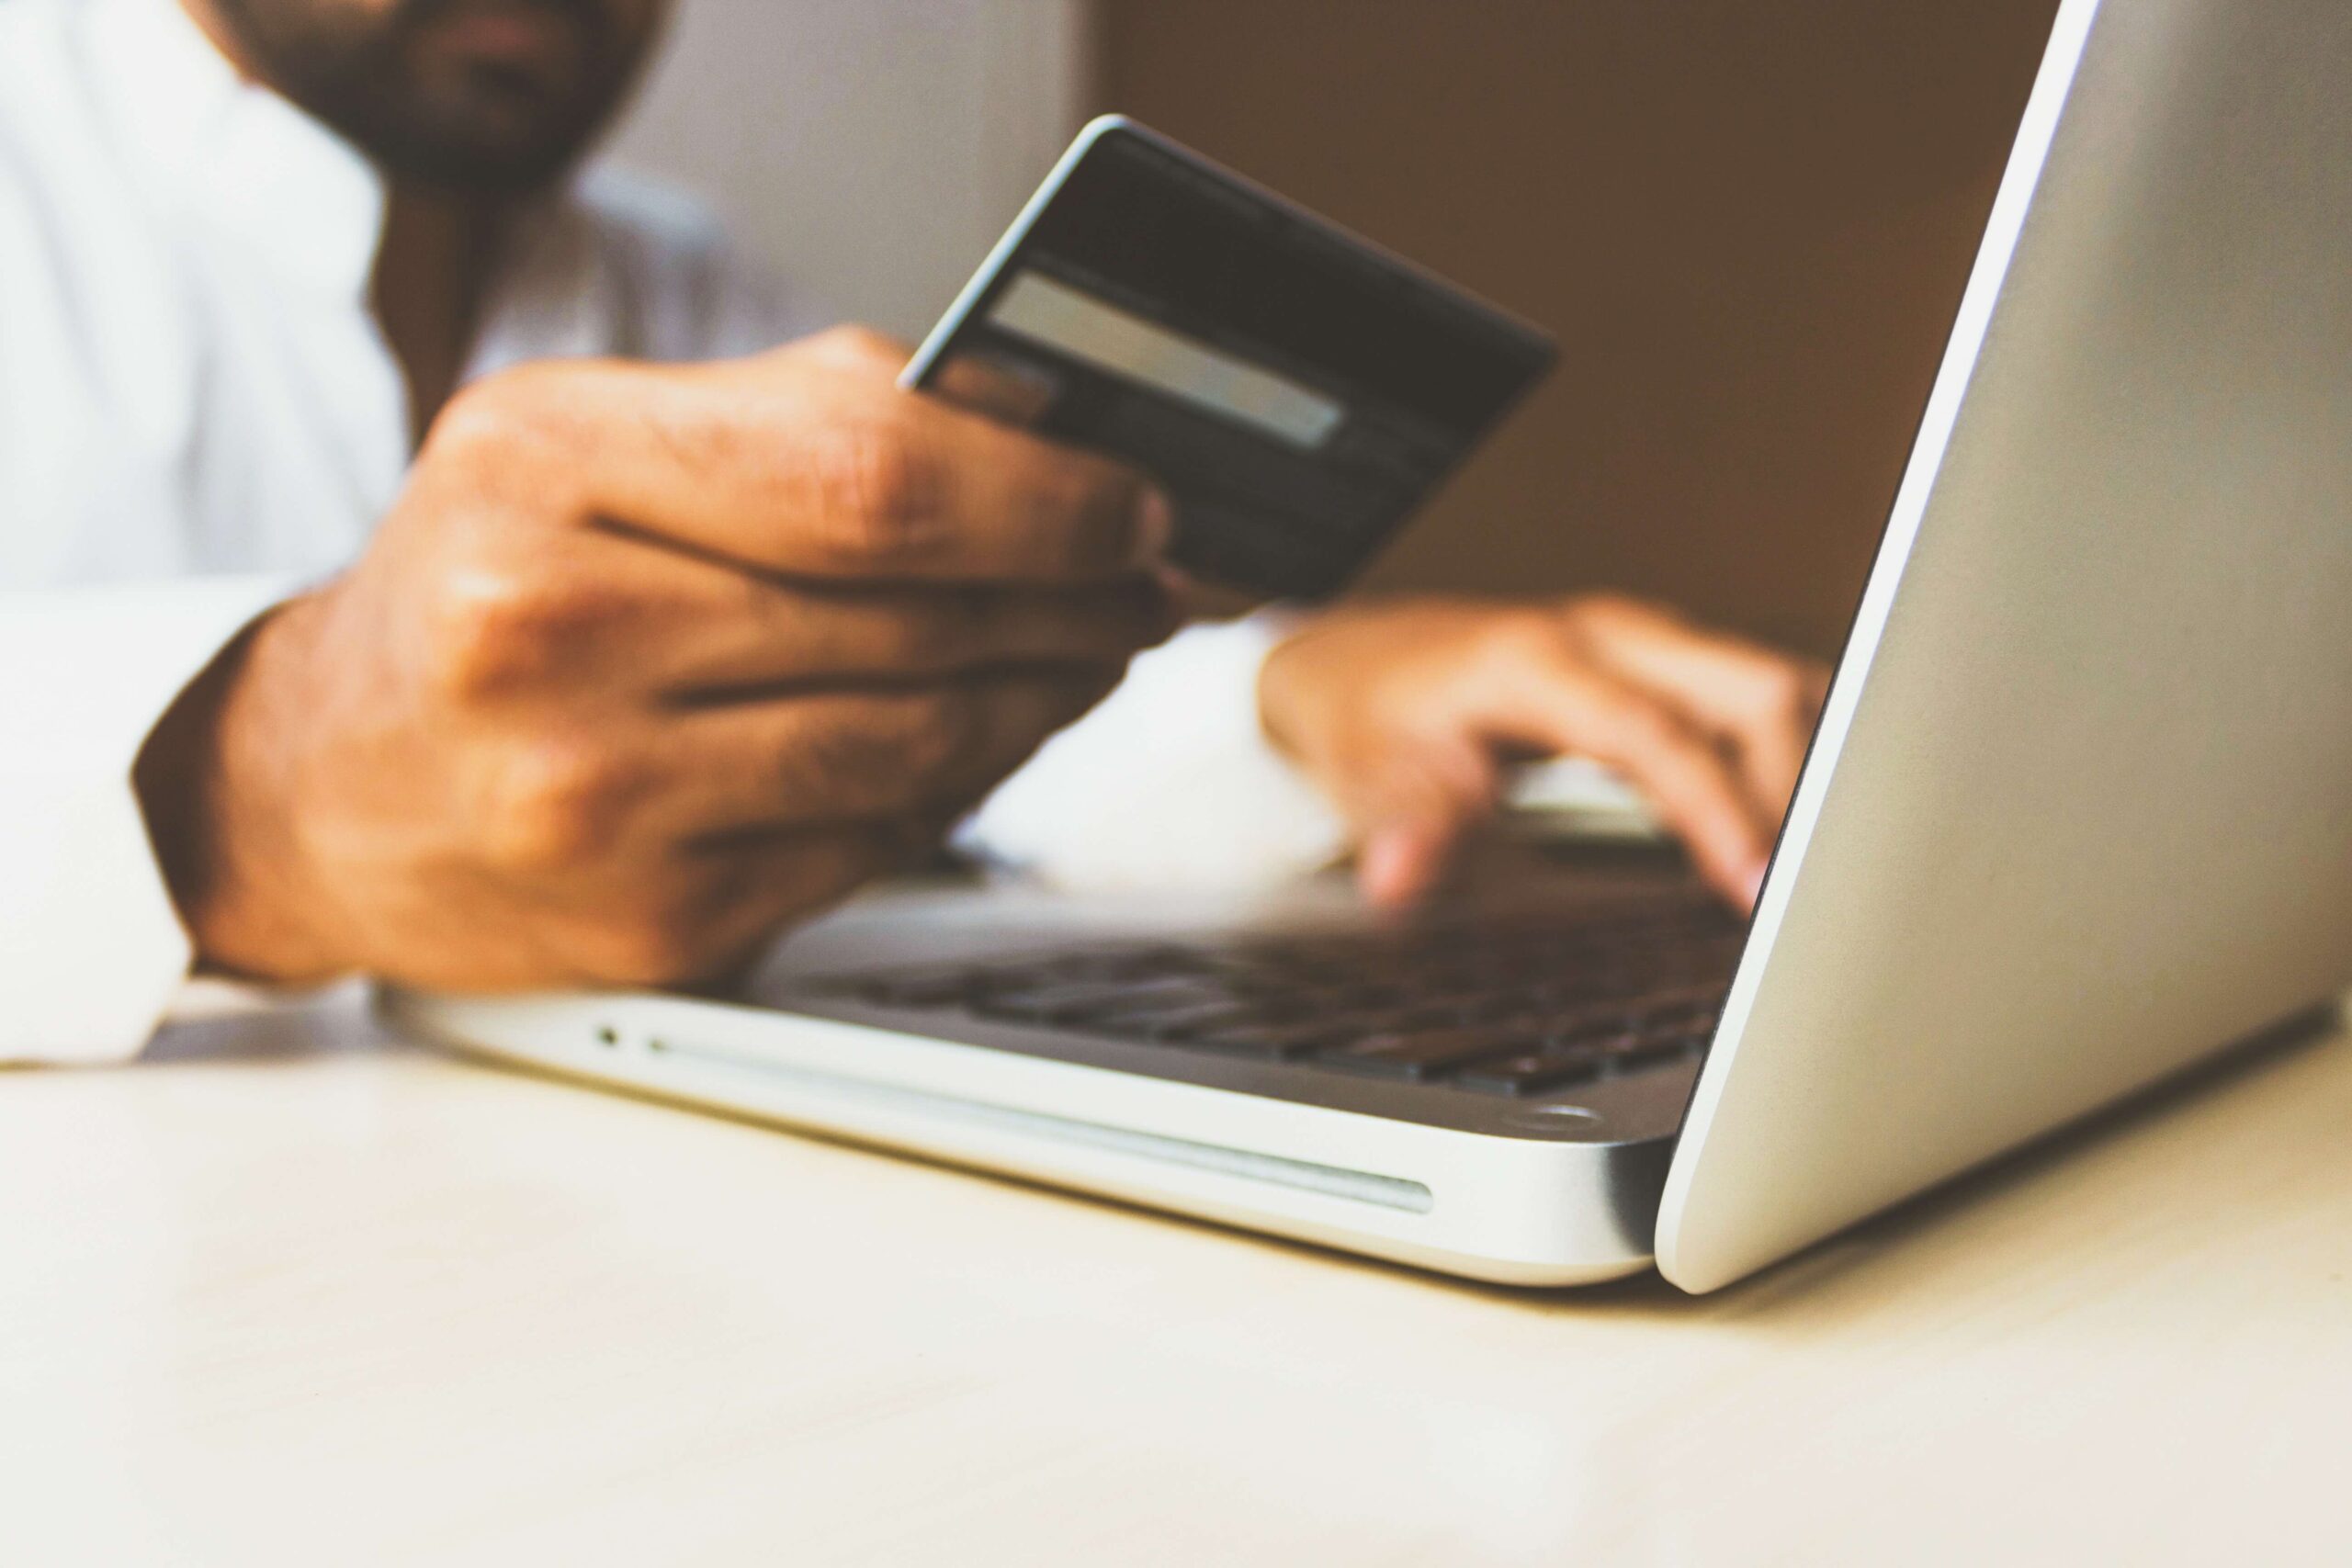 A person uses a debit card to make an online purchase